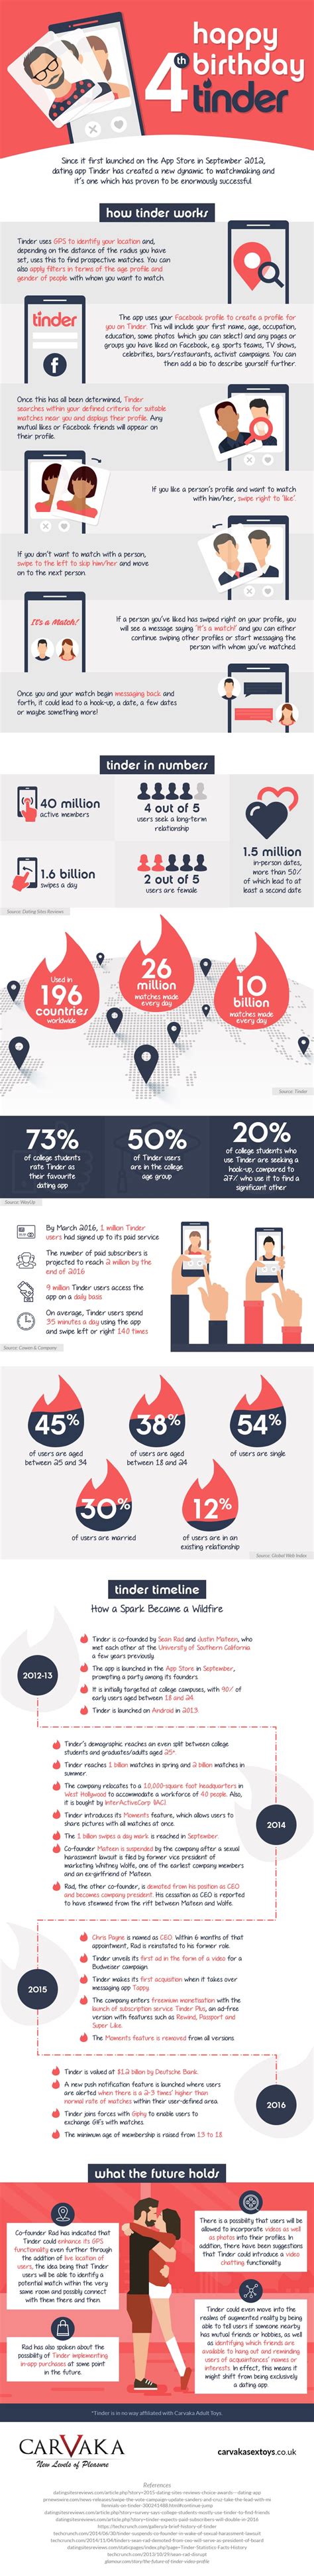 Happy 4th Birthday Tinder Infographic Daily Waffle Infographic Social Media Infographic